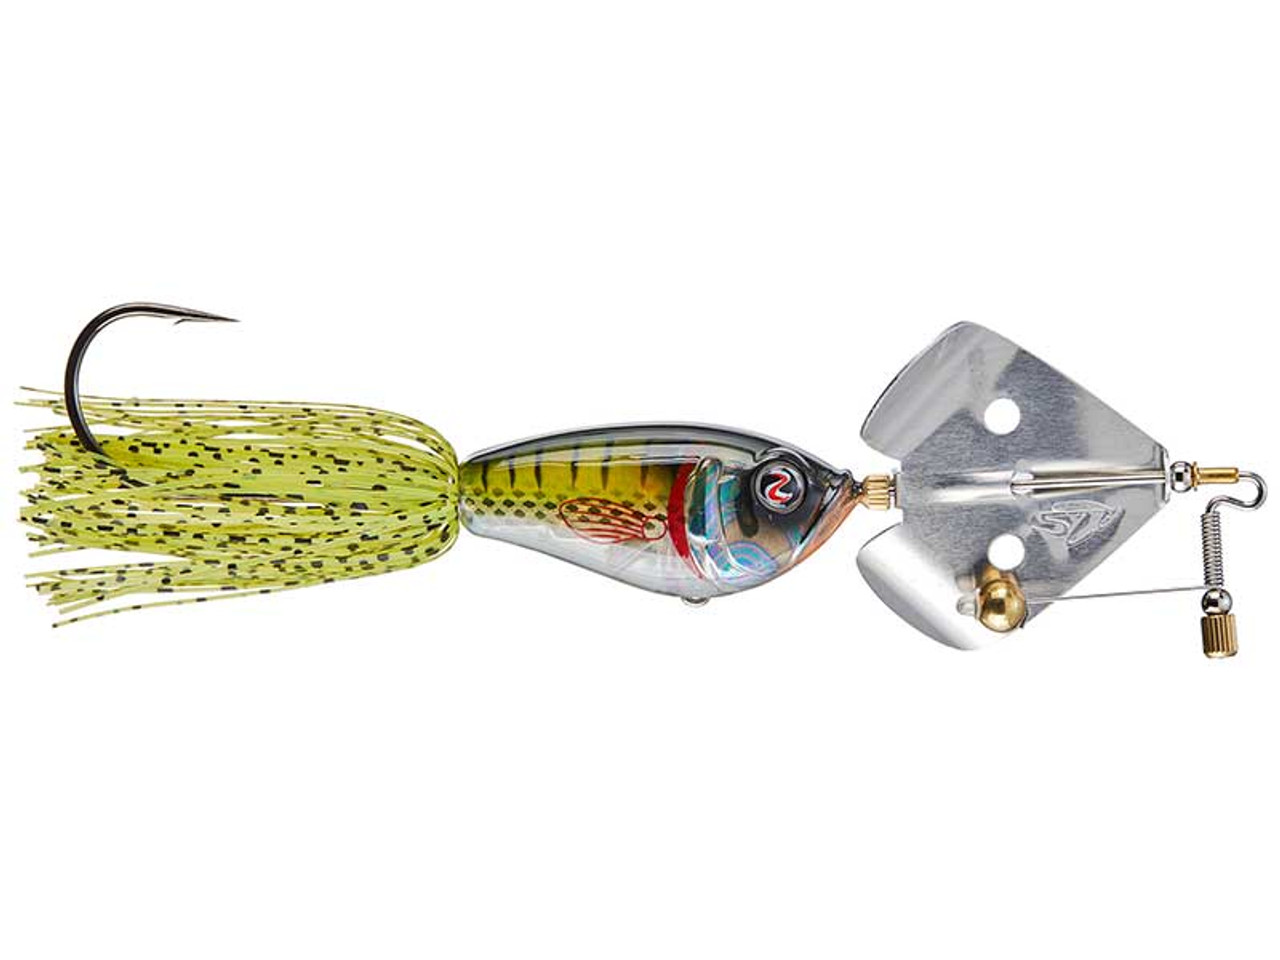  Casting Bait Buzzbaits Fishing Lure Metal Spinner Baits Flash  Topwater Swimbaits for Freshwater Fishing in Rivers and Lakes (9G,  DW571-5PIC) : Sports & Outdoors